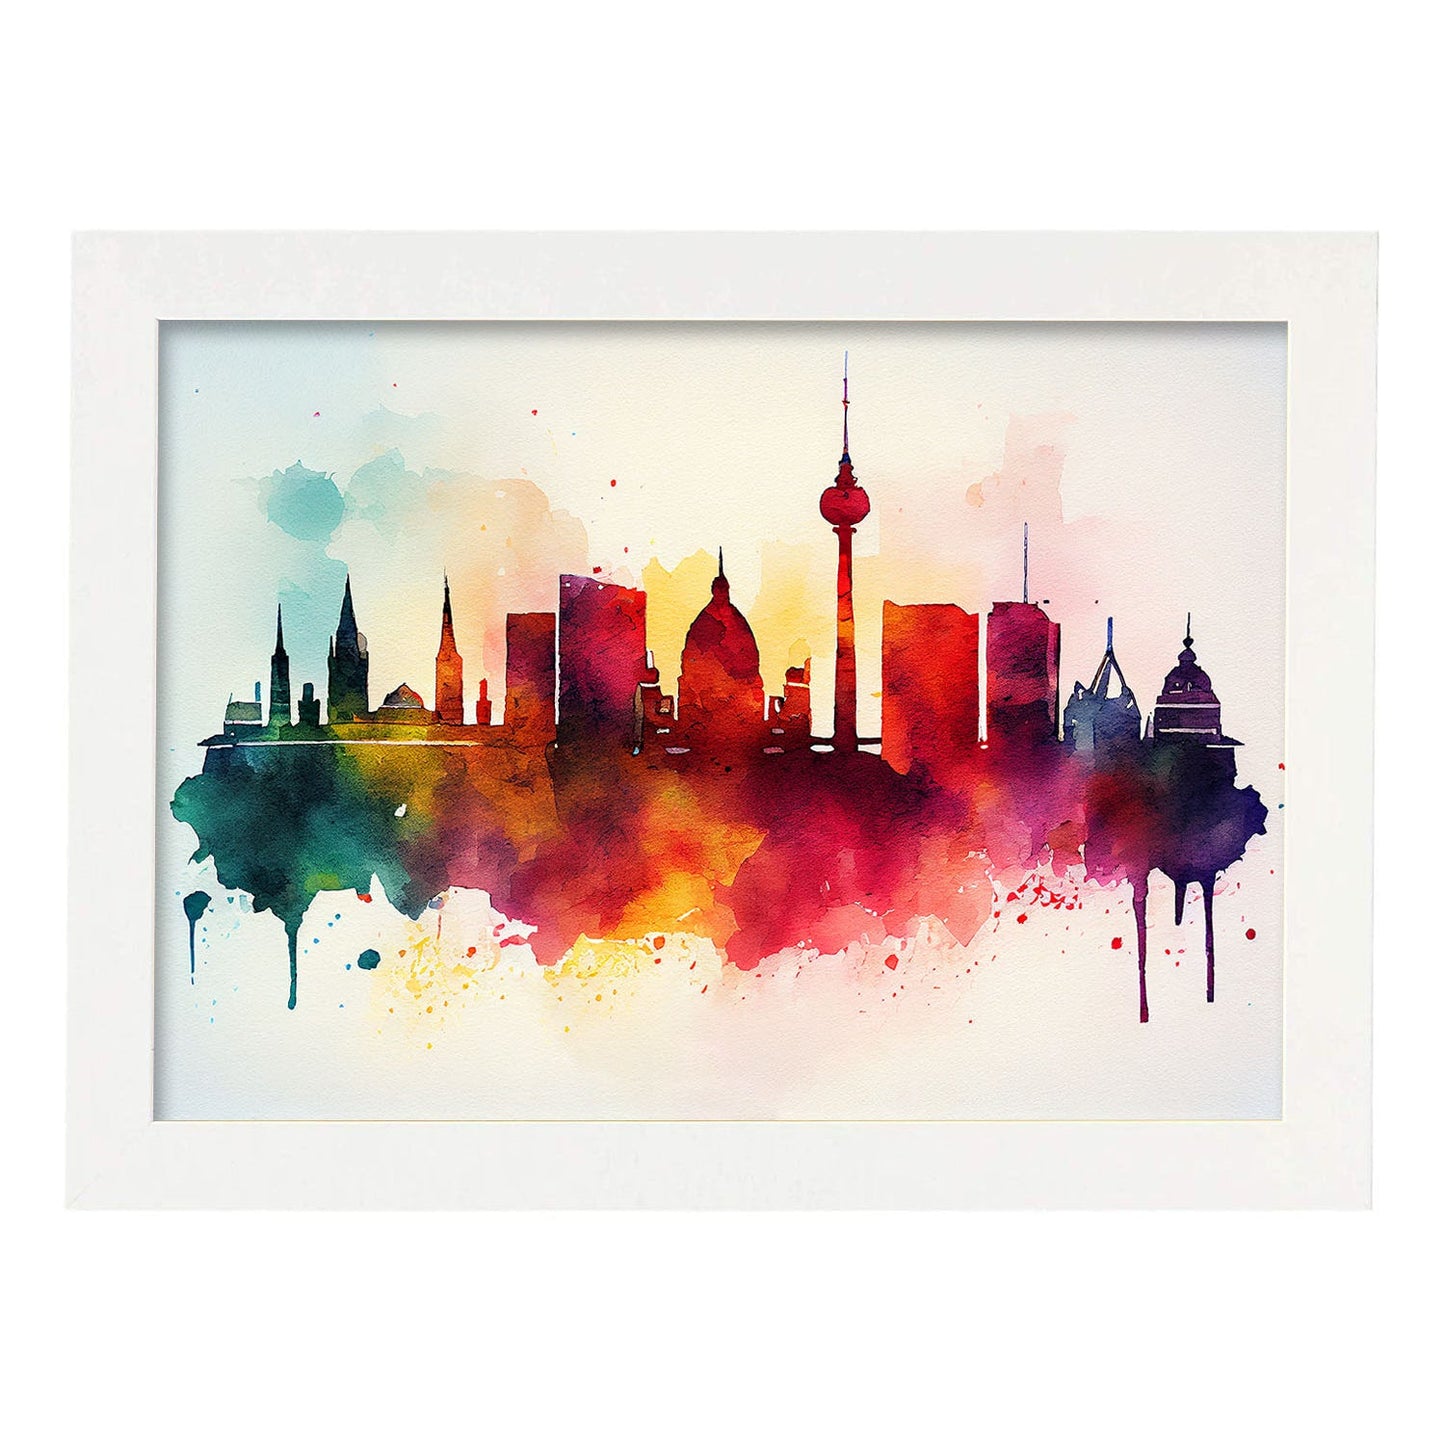 Nacnic watercolor of a skyline of the city of Berlin_2. Aesthetic Wall Art Prints for Bedroom or Living Room Design.-Artwork-Nacnic-A4-Marco Blanco-Nacnic Estudio SL